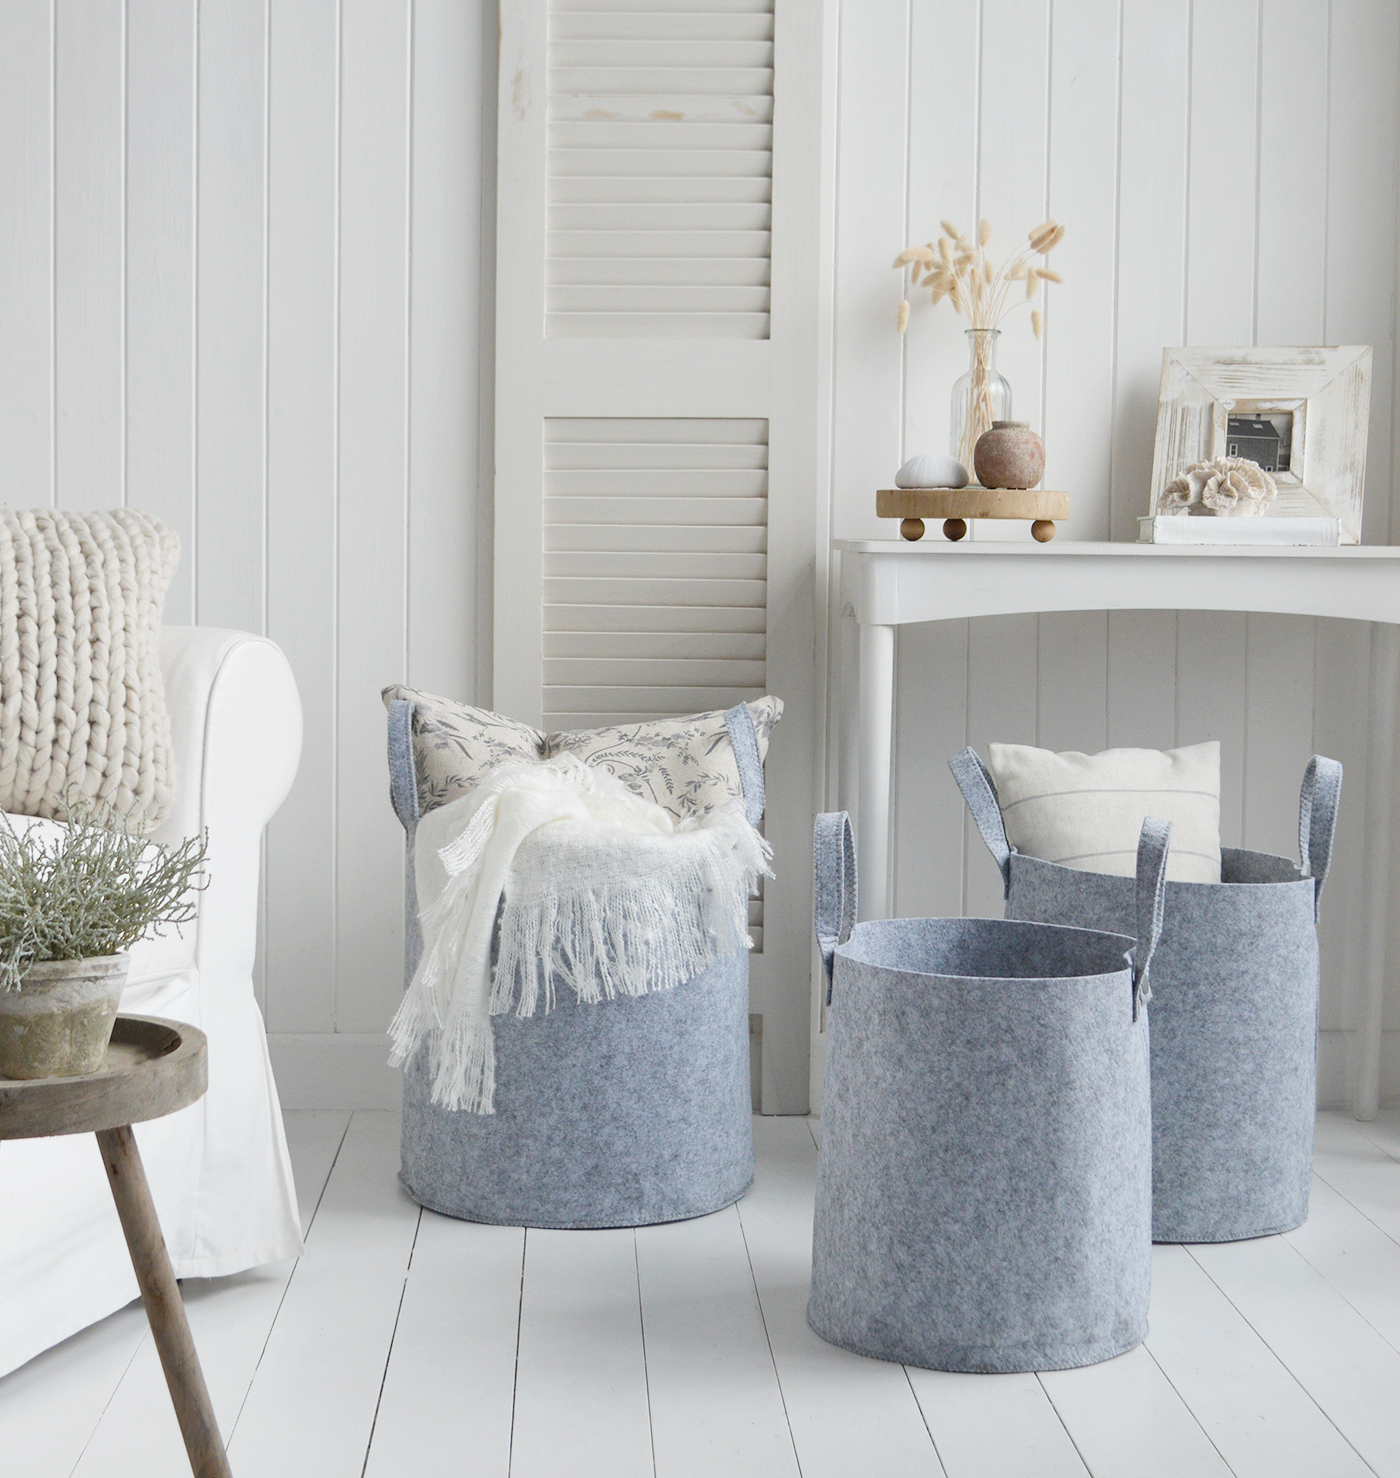 Set of 3 kittery baskets, in grey these are a versatile solution to storage in a coastal or modern farmhouse style home.